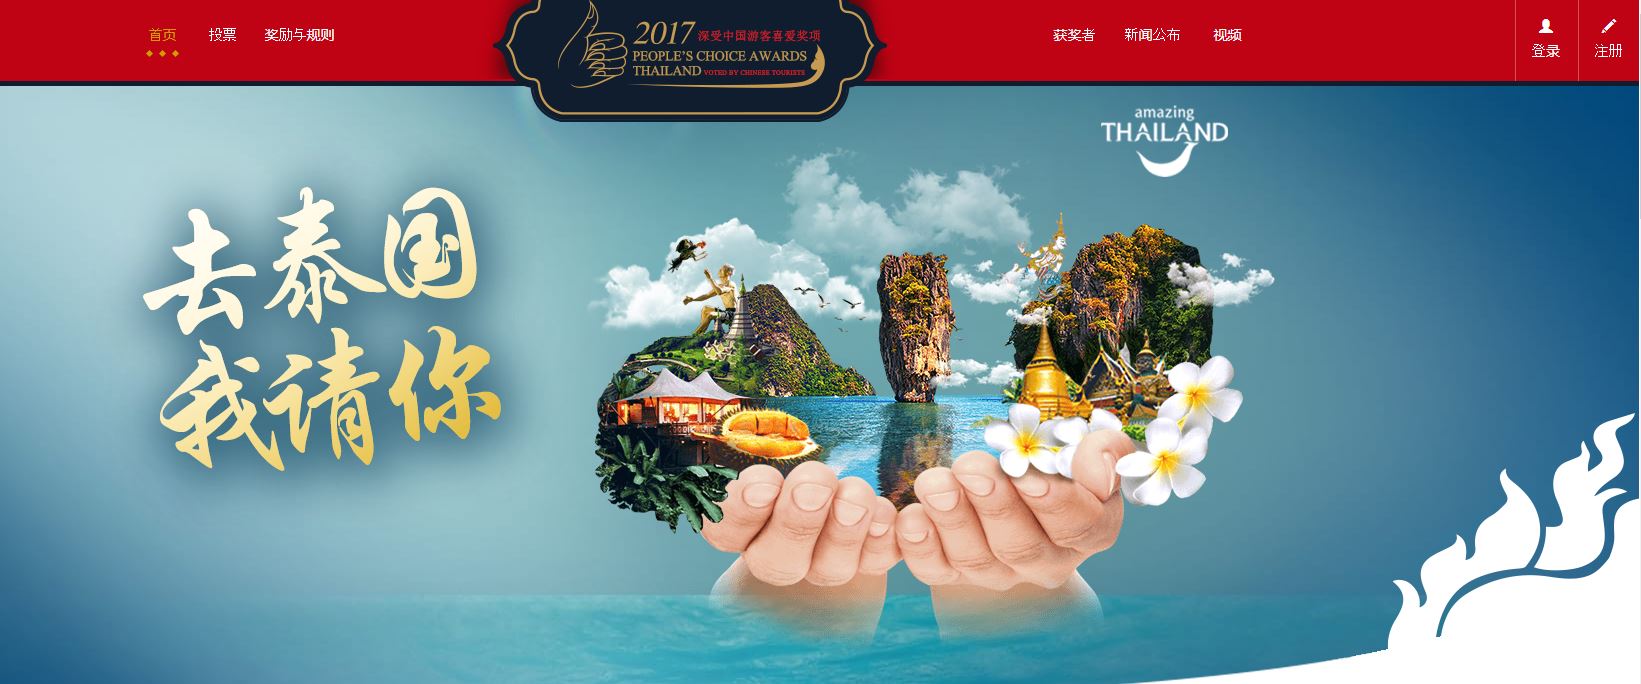 Chinese tourists already account for a third of all foreign tourists visiting Thailand